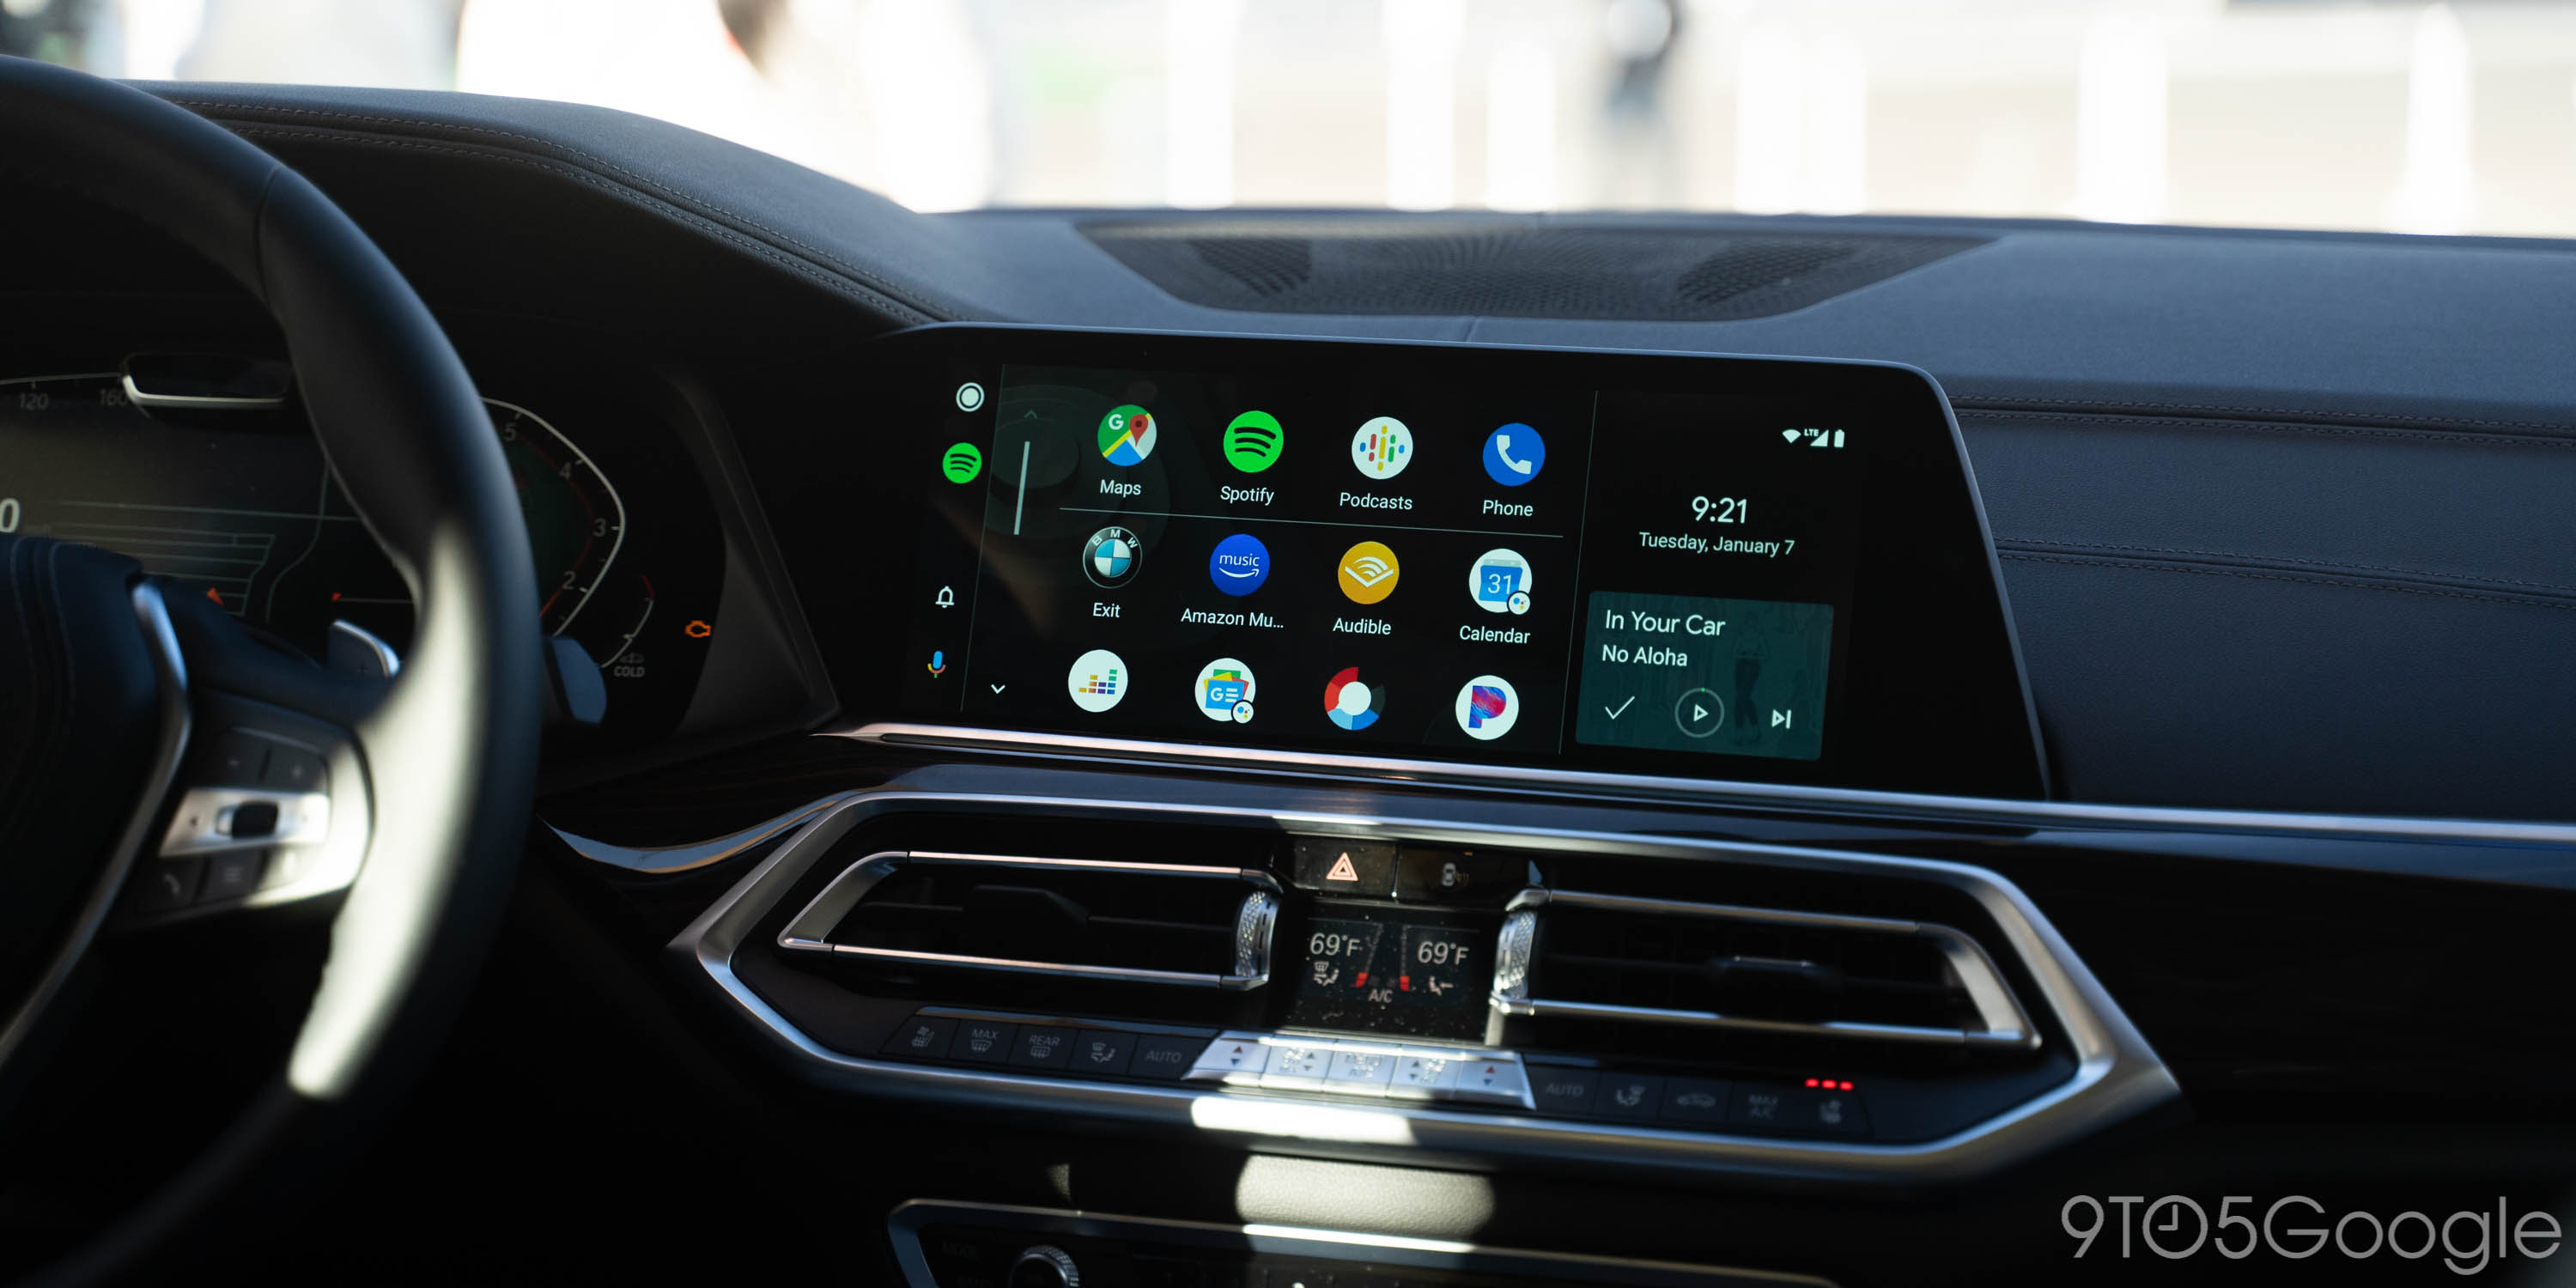 BMW ships cars without Apple, Google tech